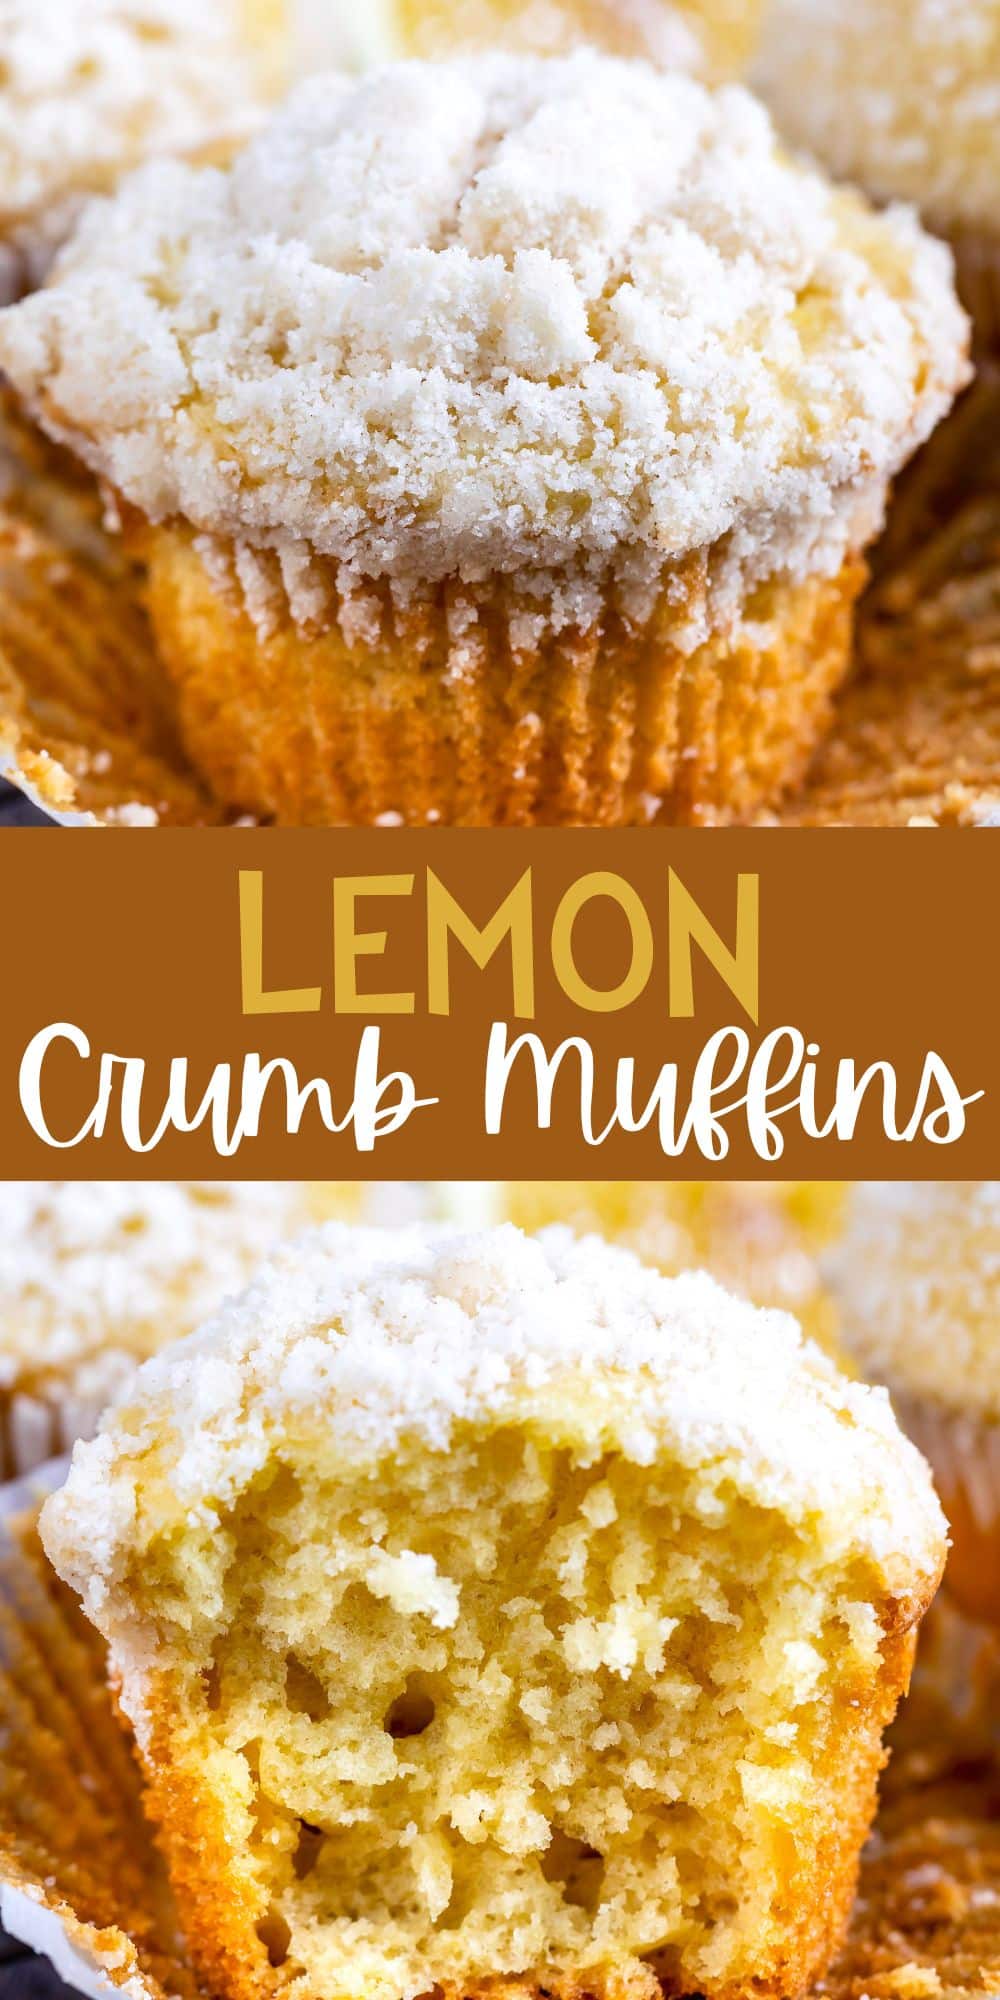 two photos of lemon muffins topped with a white crumb topping and lemons in the background with words on the image.